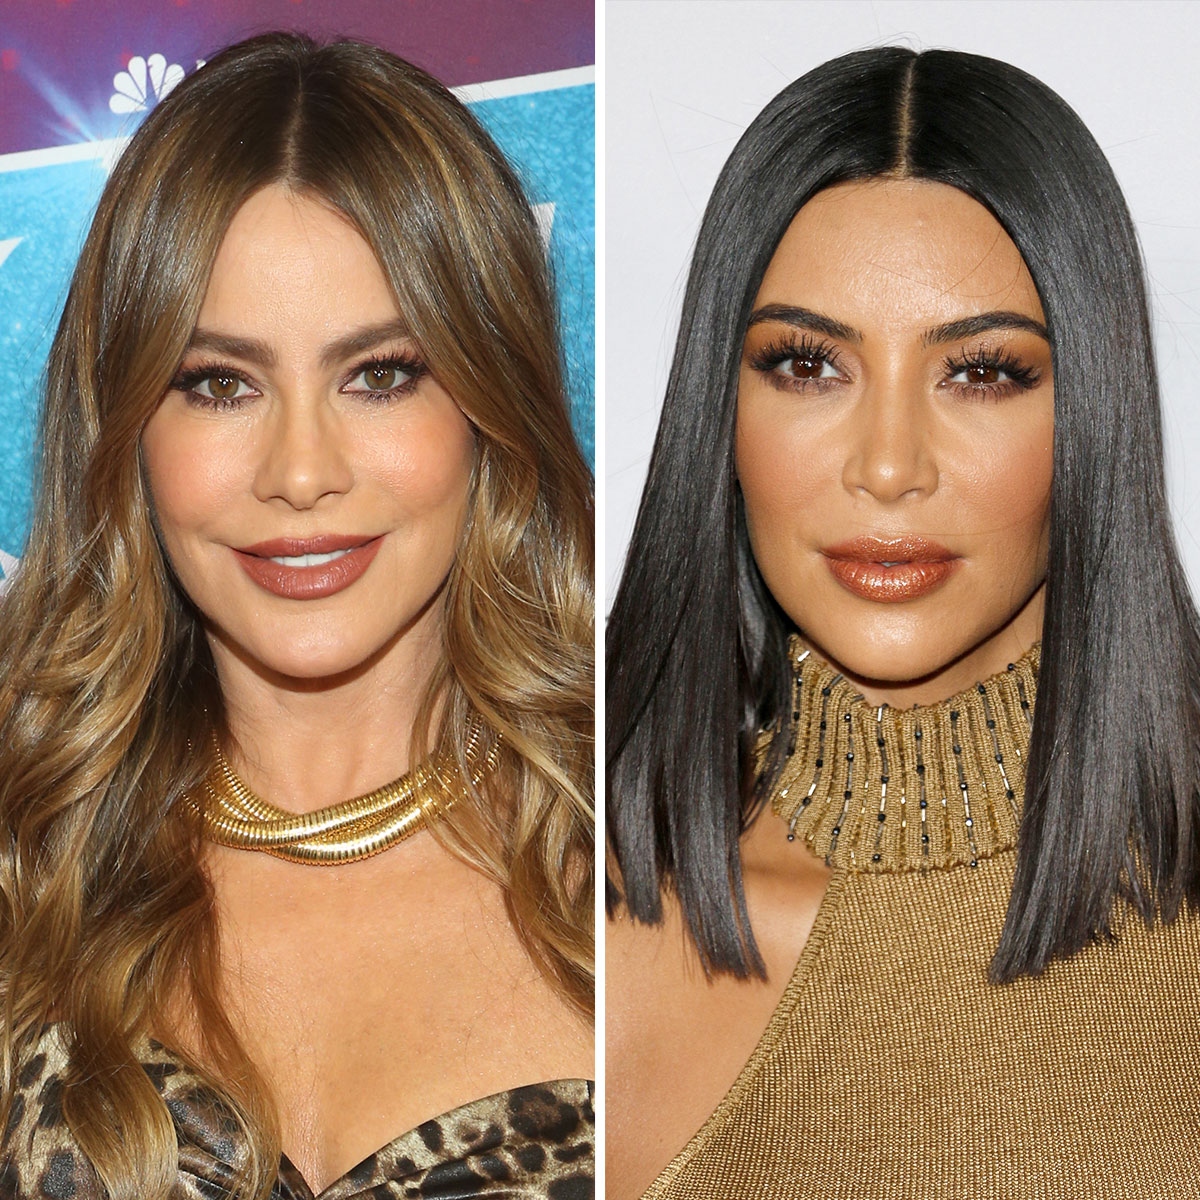 Fans Say Kim Kardashian And Sofia Vergara Were Caught Distorting Their  Appearances With New Instagram Filters: 'How Sad' - SHEfinds